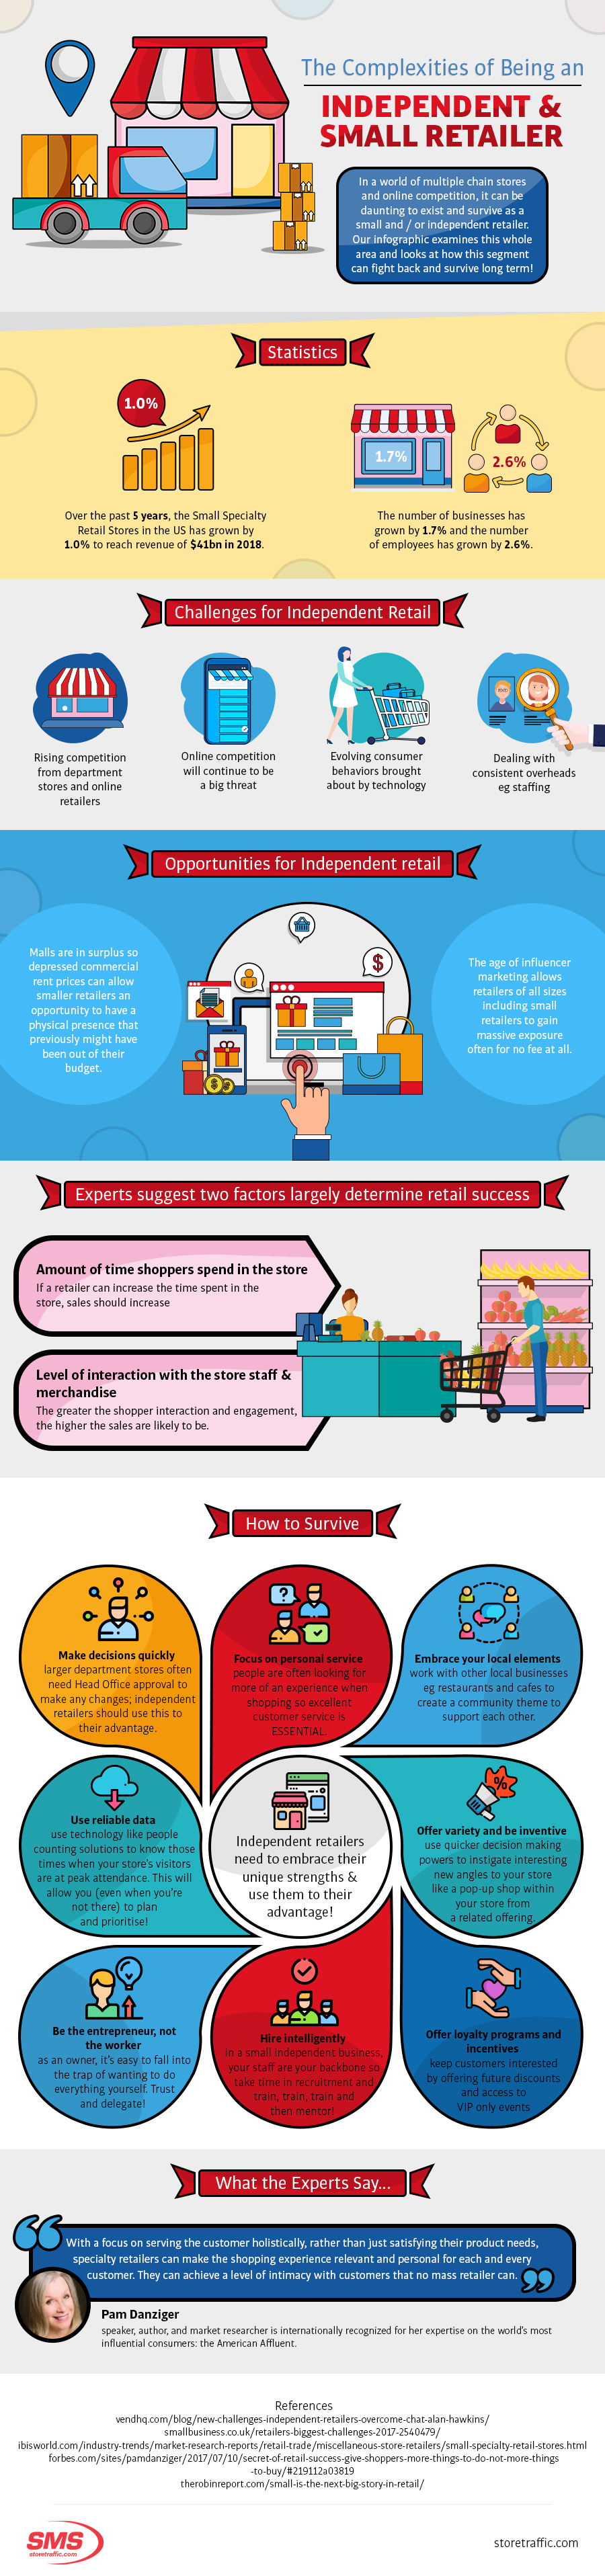 Small Retailers Infographic